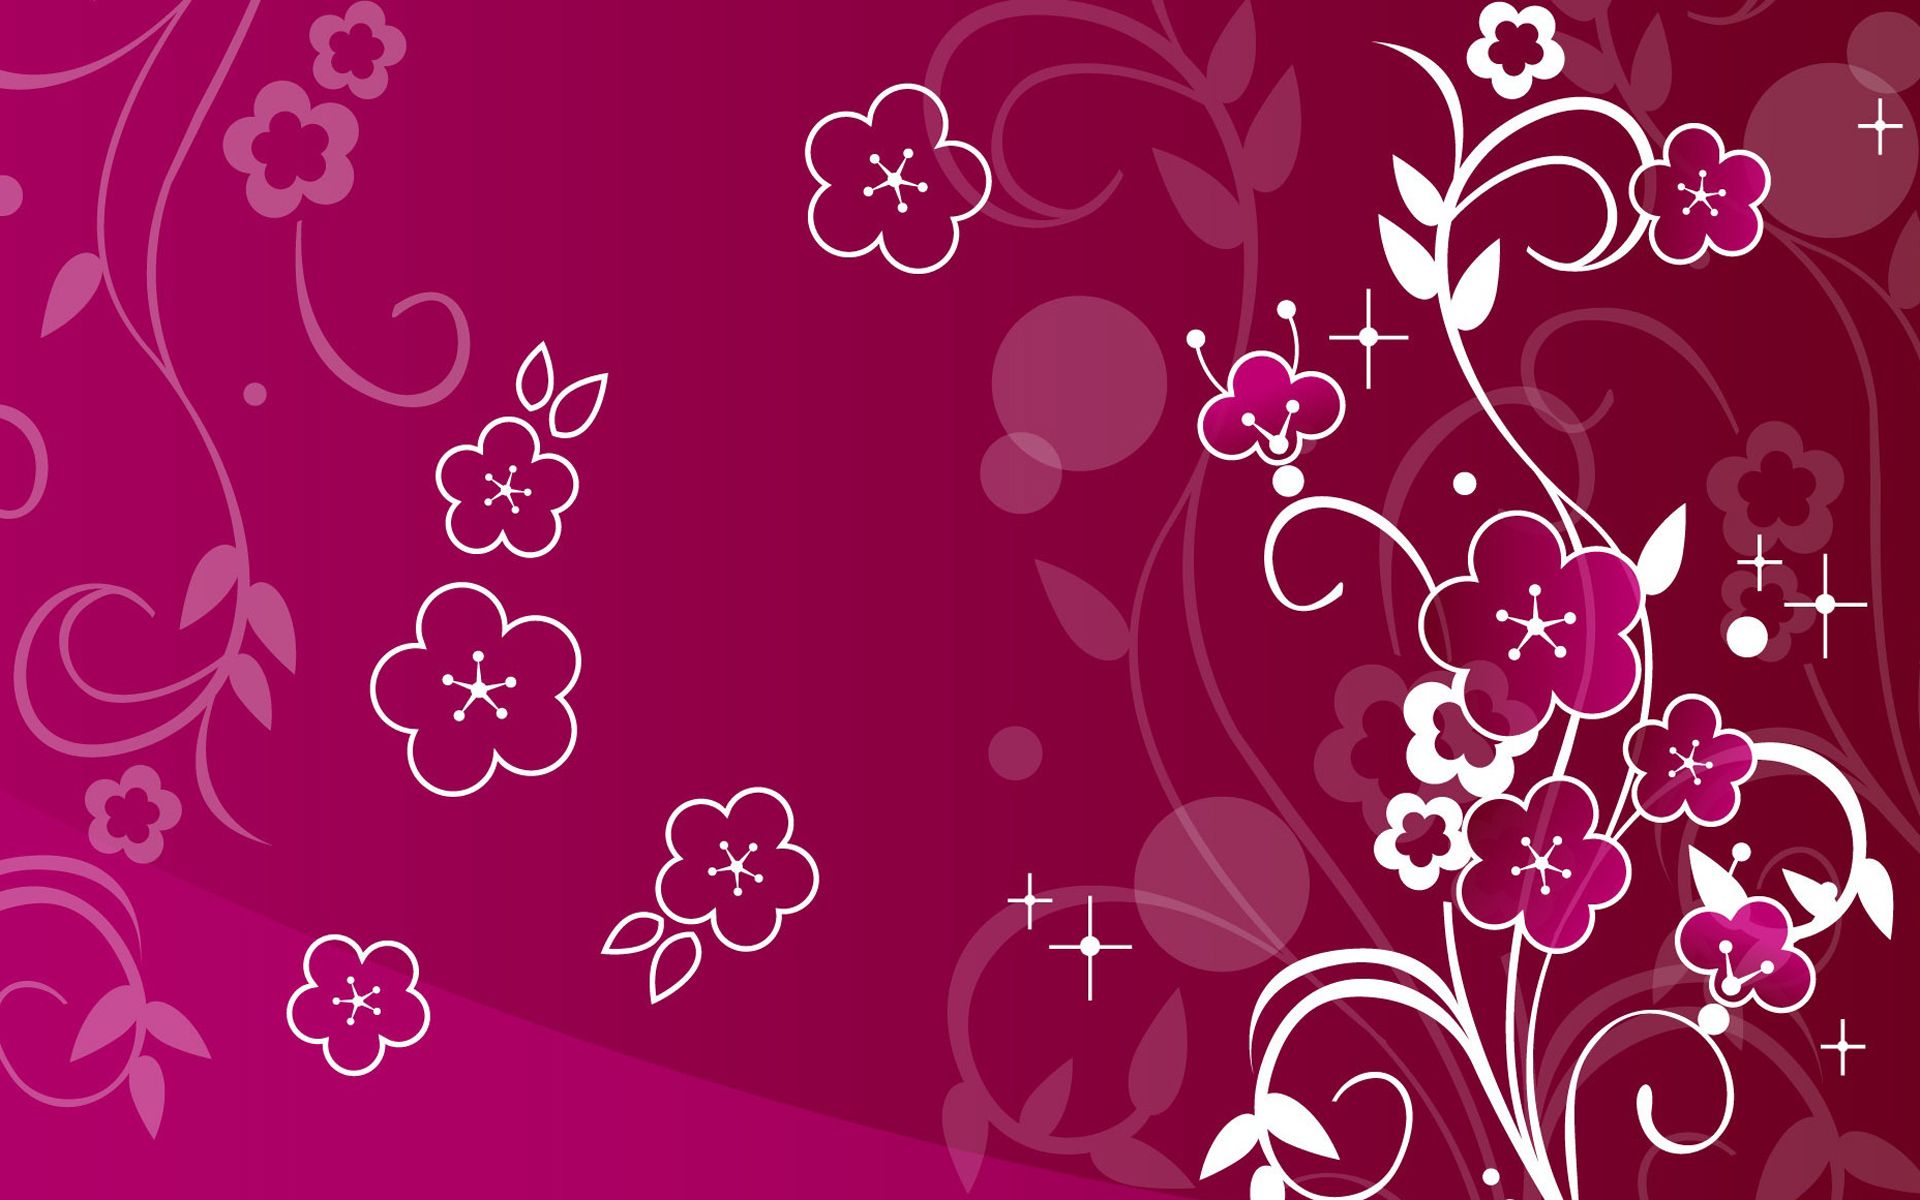 flower backgrounds - AmusingFun.com | Pictures and Graphics for ...